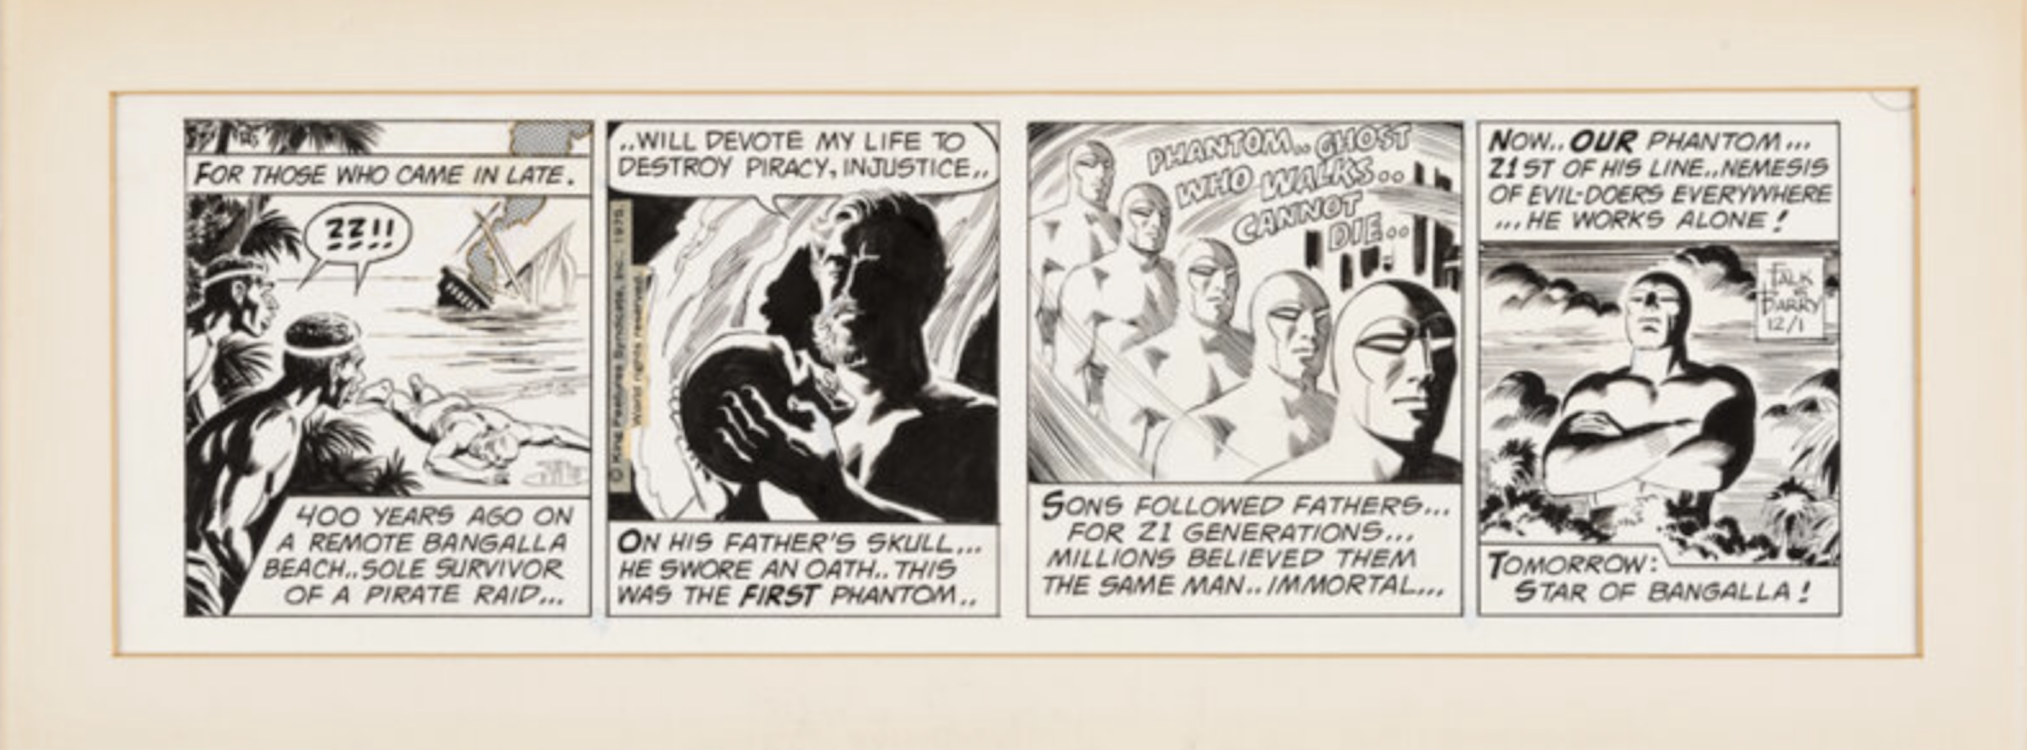 The Phantom Daily Comic Strip 12-1-75 by Sy Barry sold for $3,840. Click here to get your original art appraised.